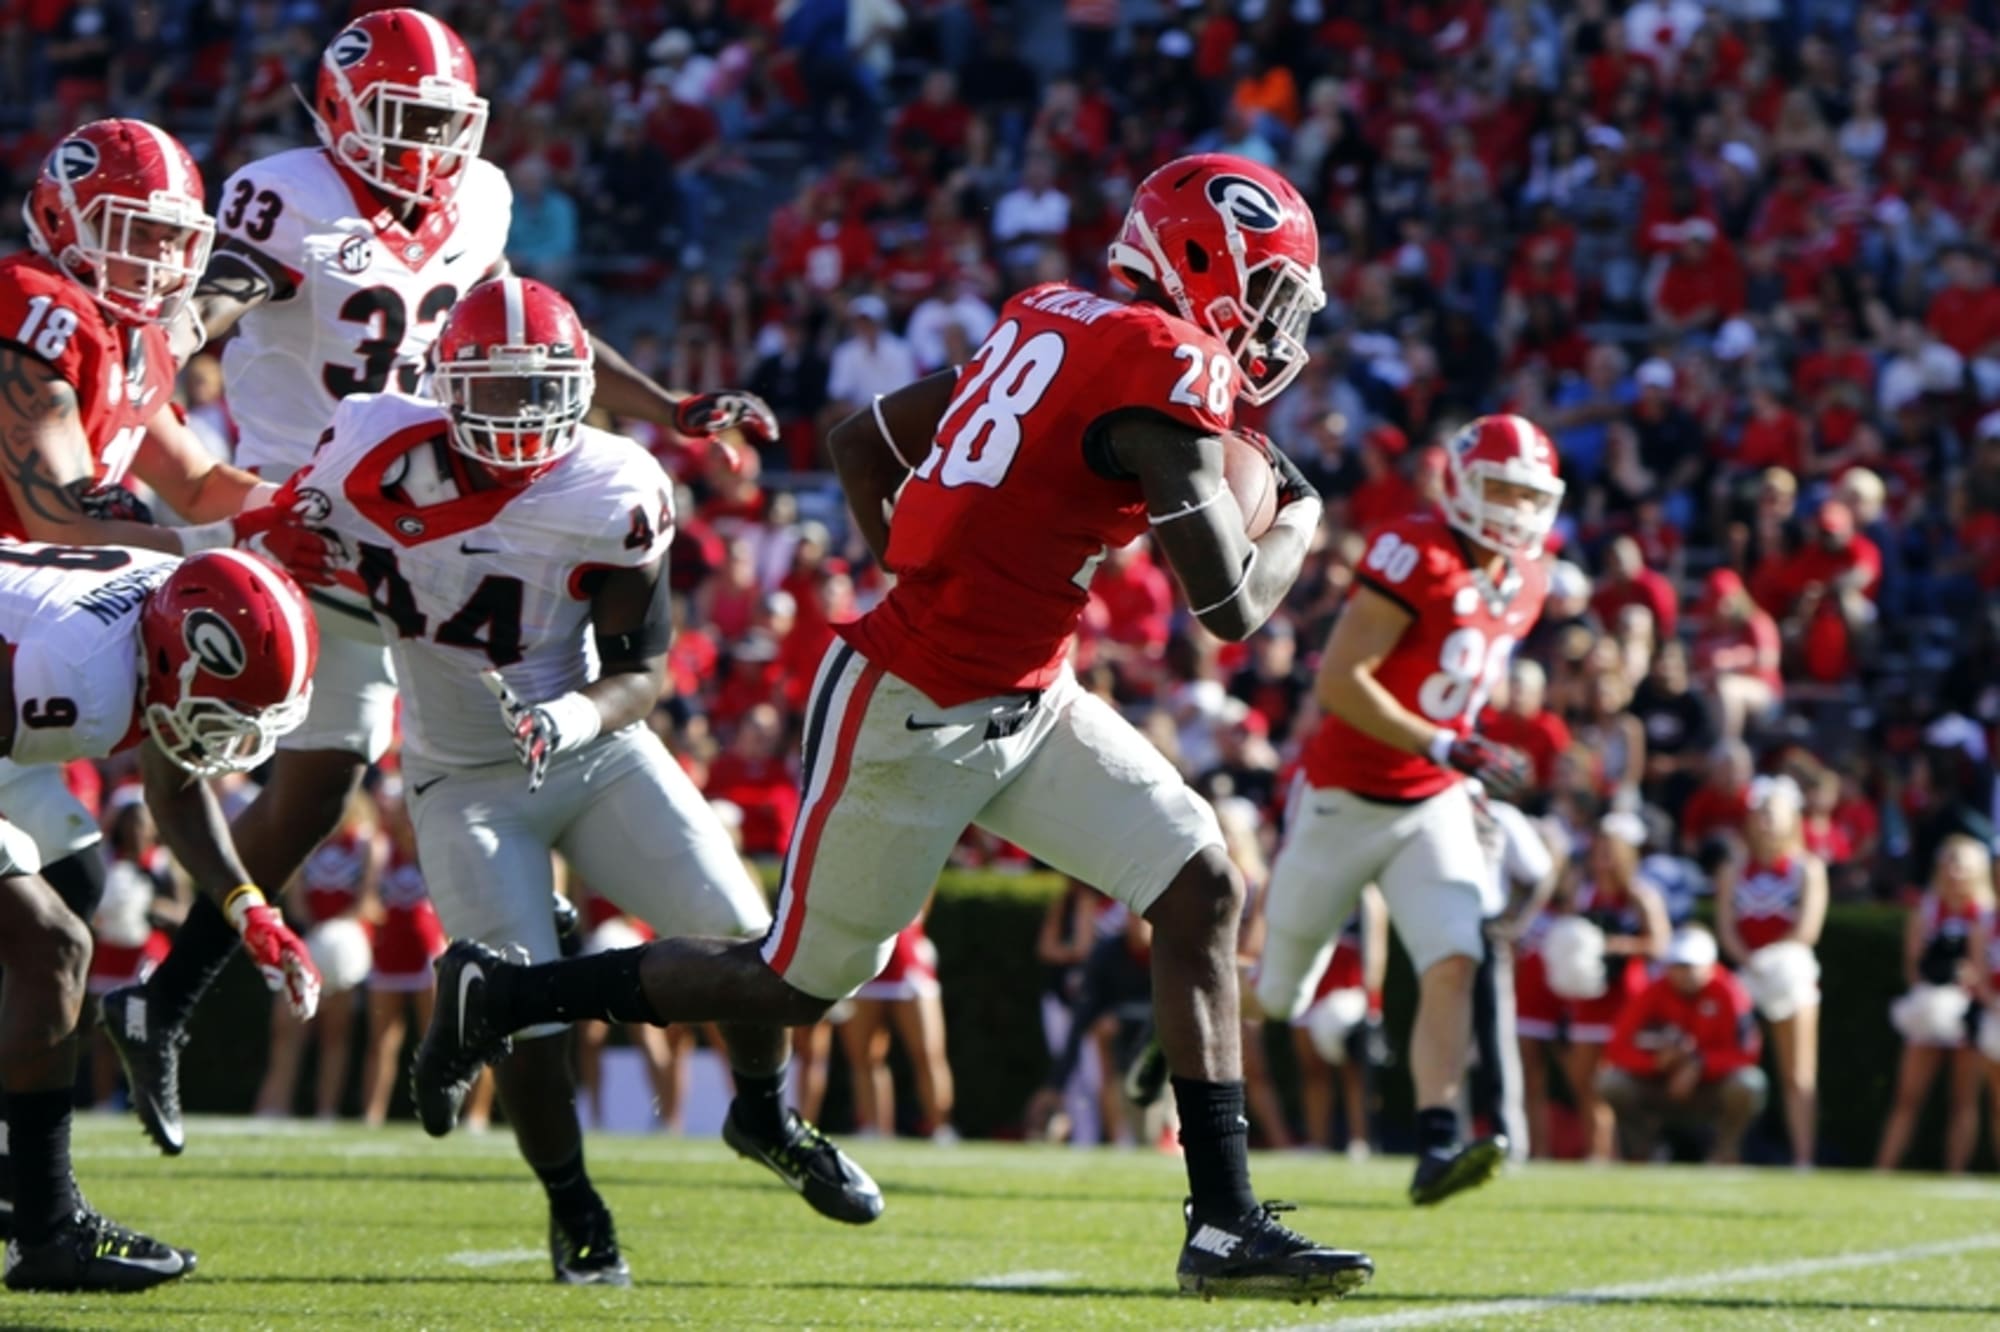 Takeaways from Georgia's G-Day game